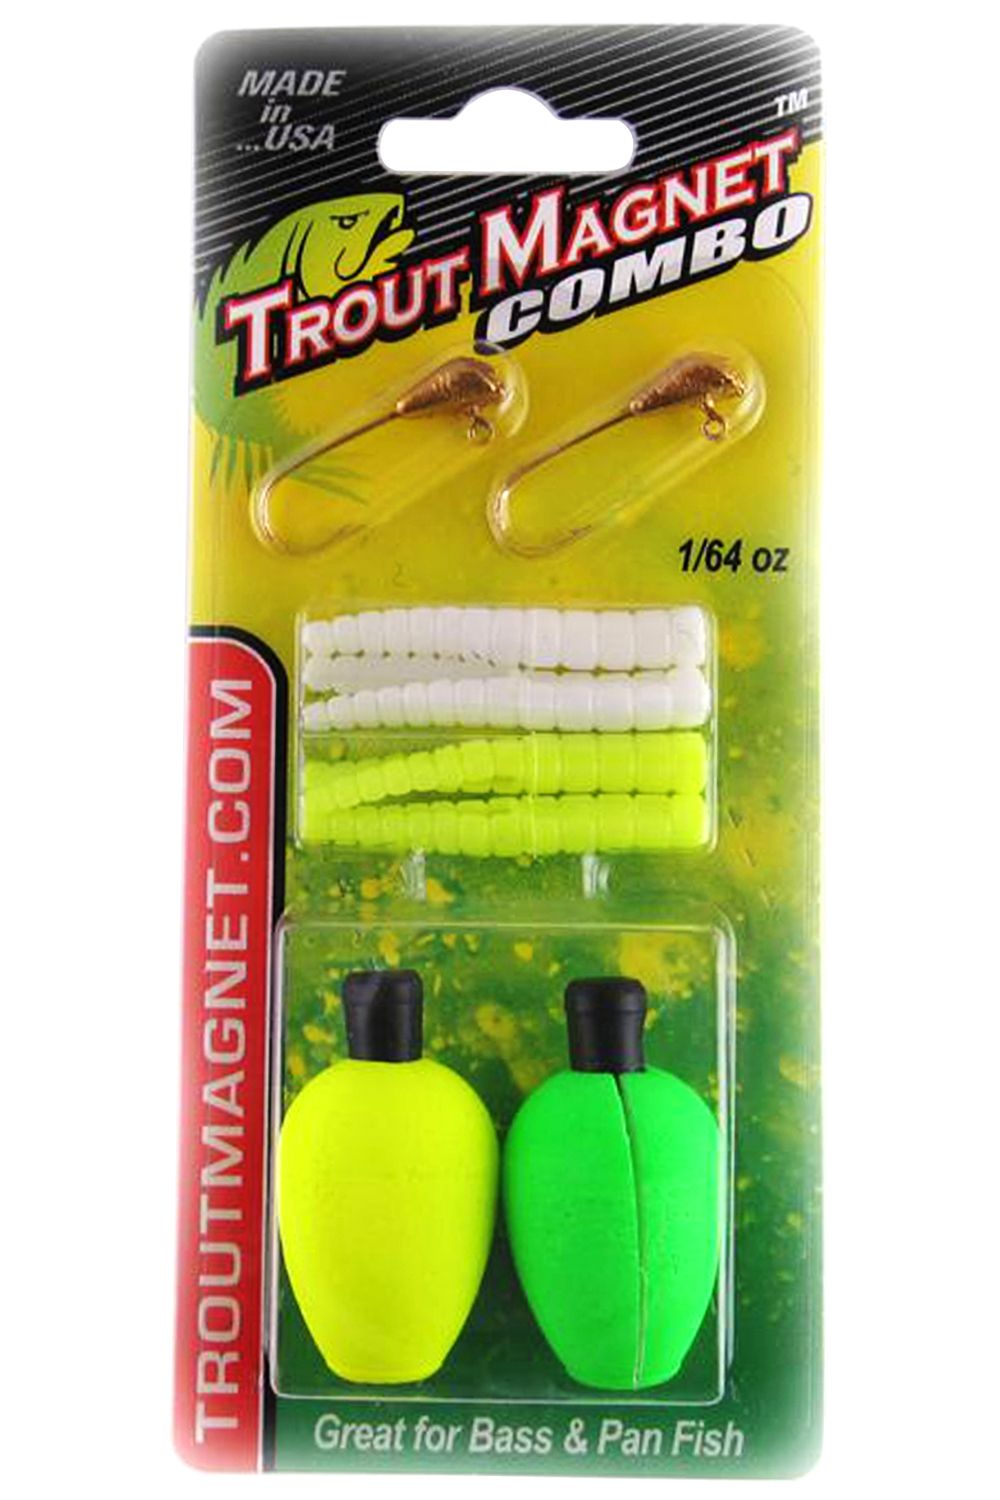 Dick's Sporting Goods Leland's Trout Magnet Combo Kit